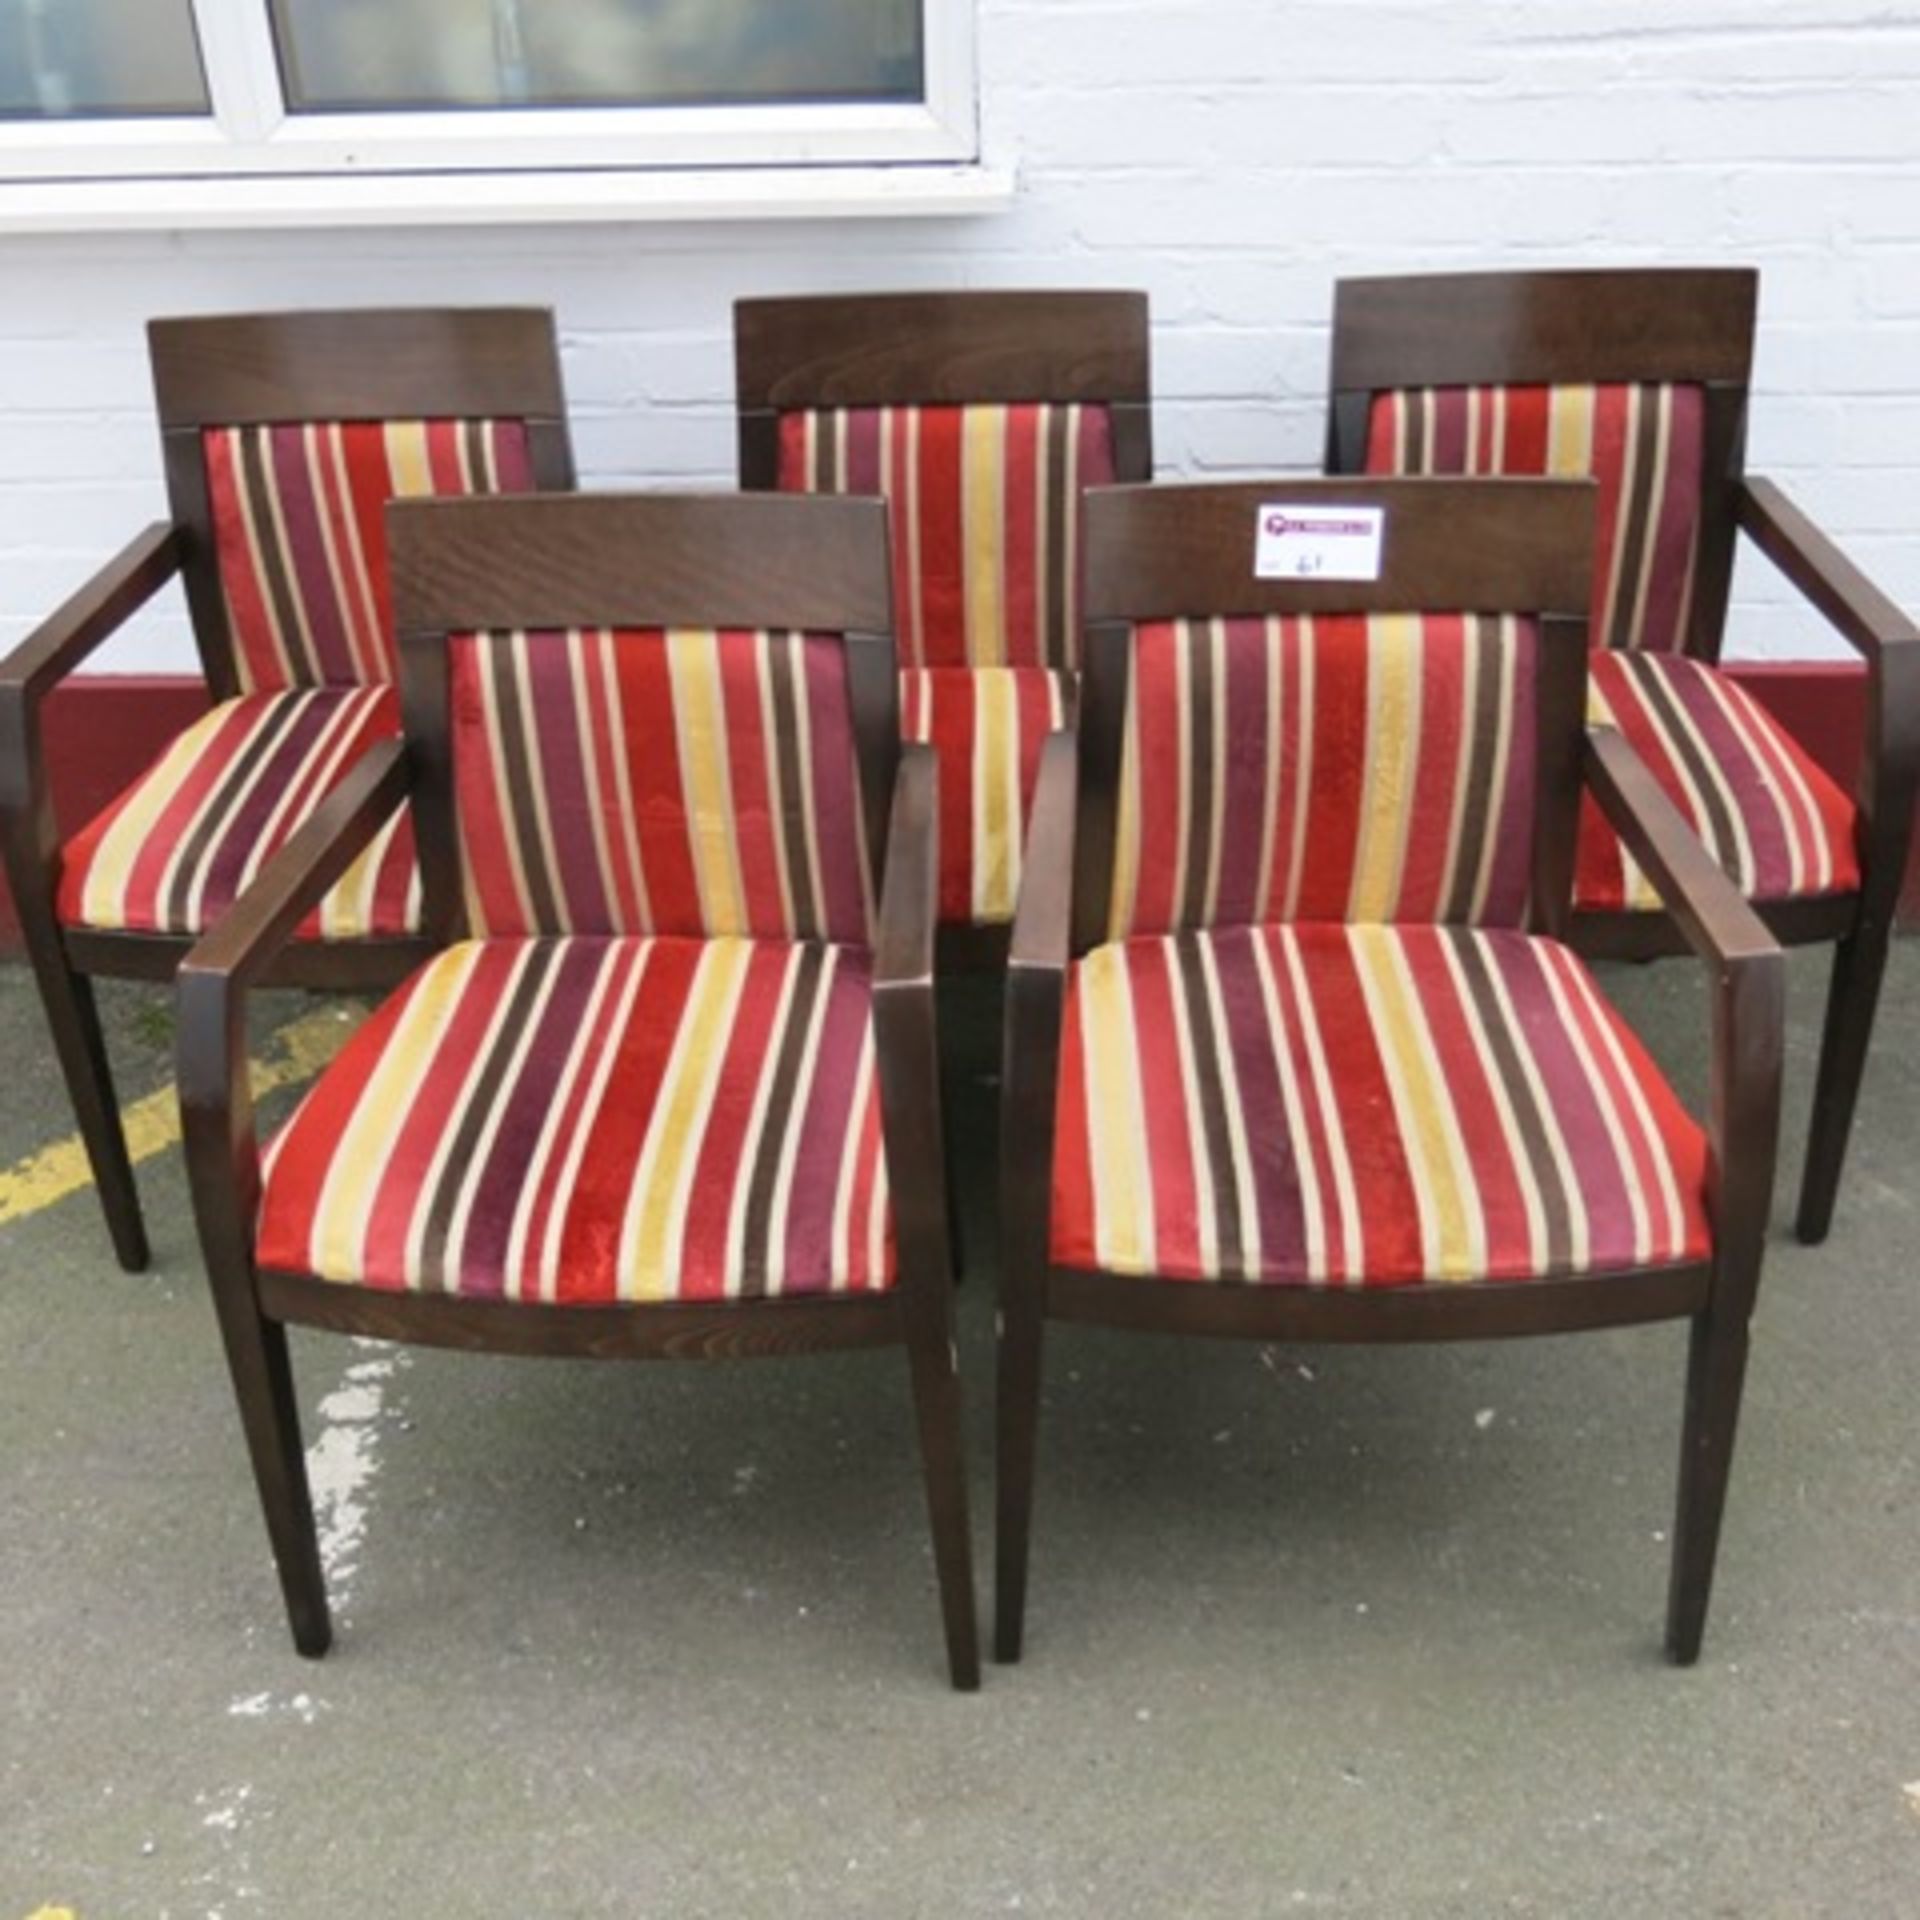 5 x Stained Darkwood Dining Chairs, Upholstered in Red/Gold/Brown Fabric